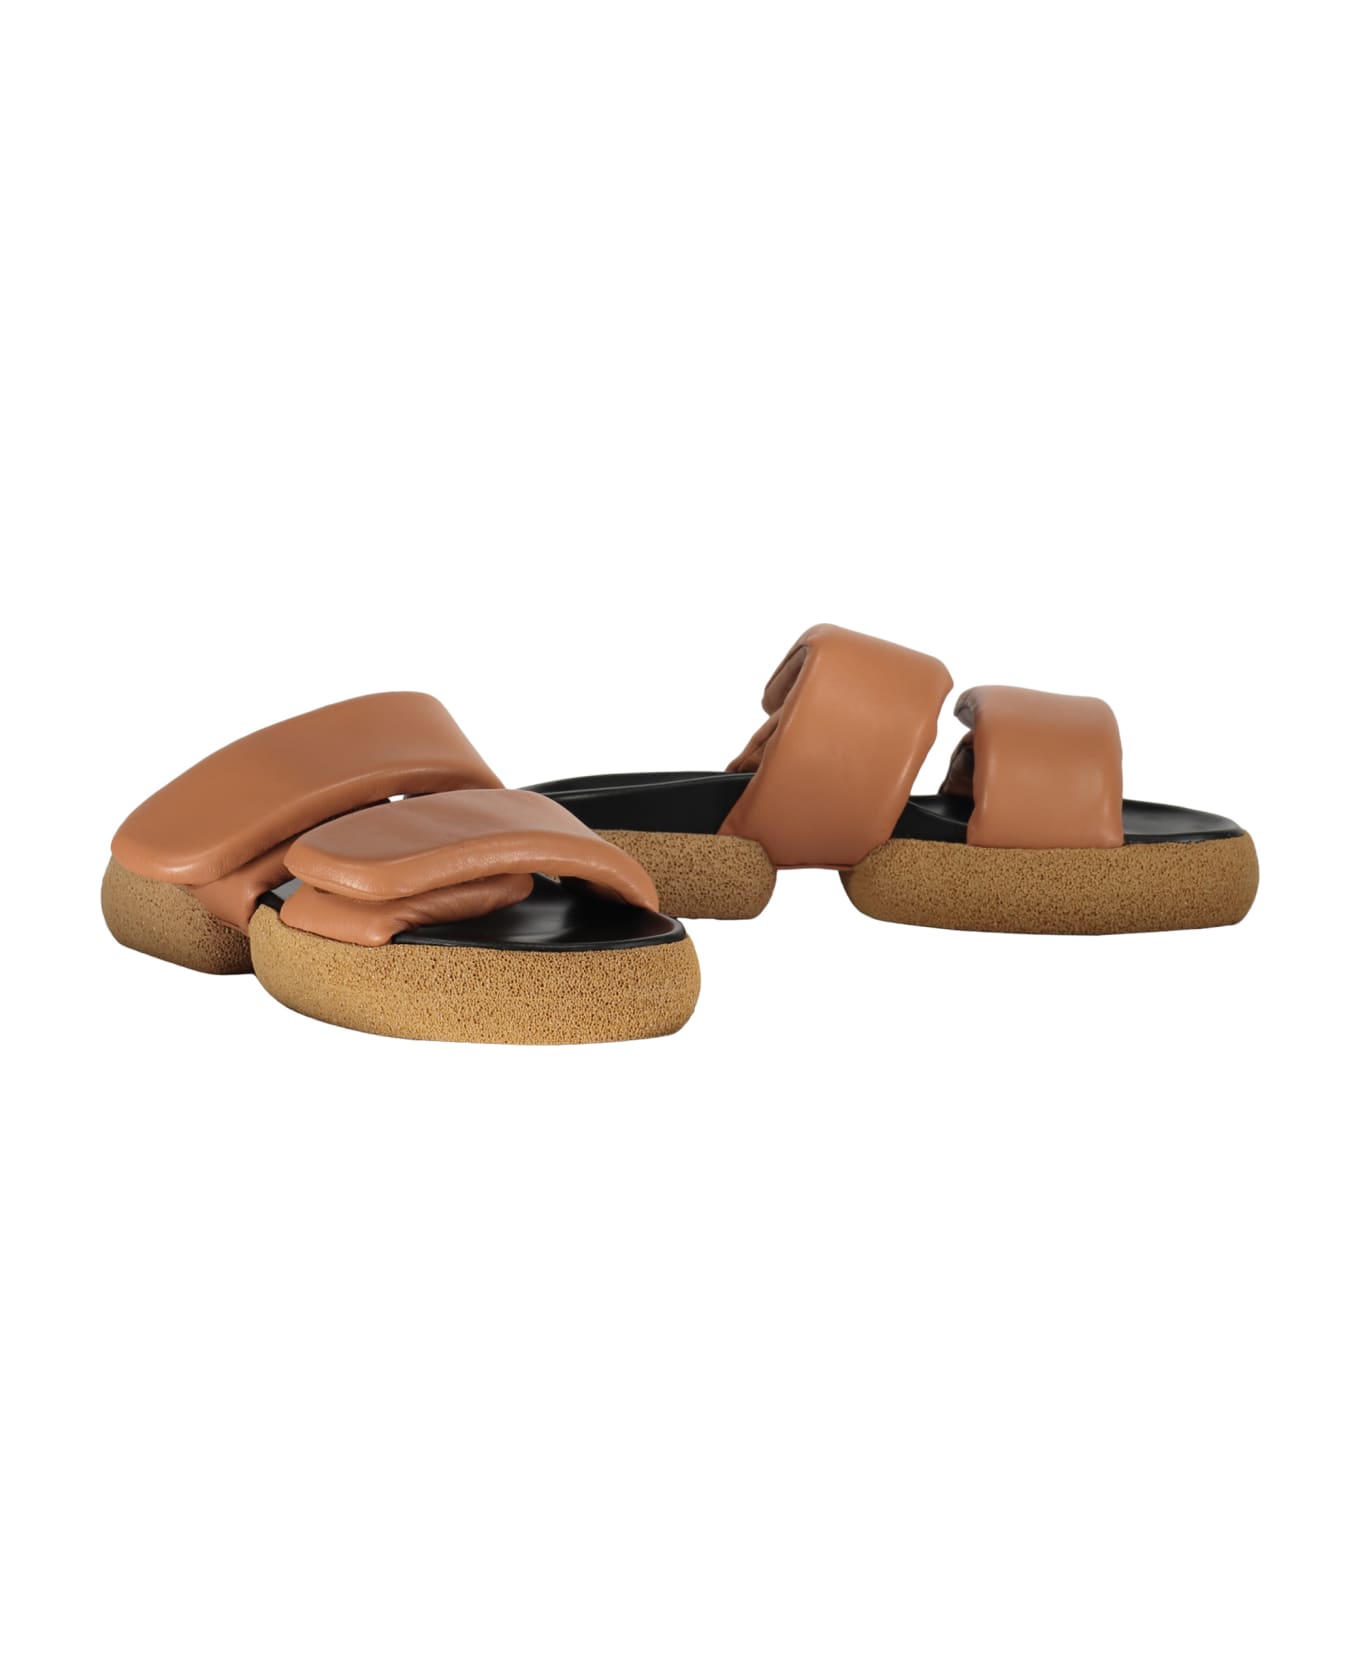 Dries Van Noten Leather And Rubber Slides - Beige その他各種シューズ